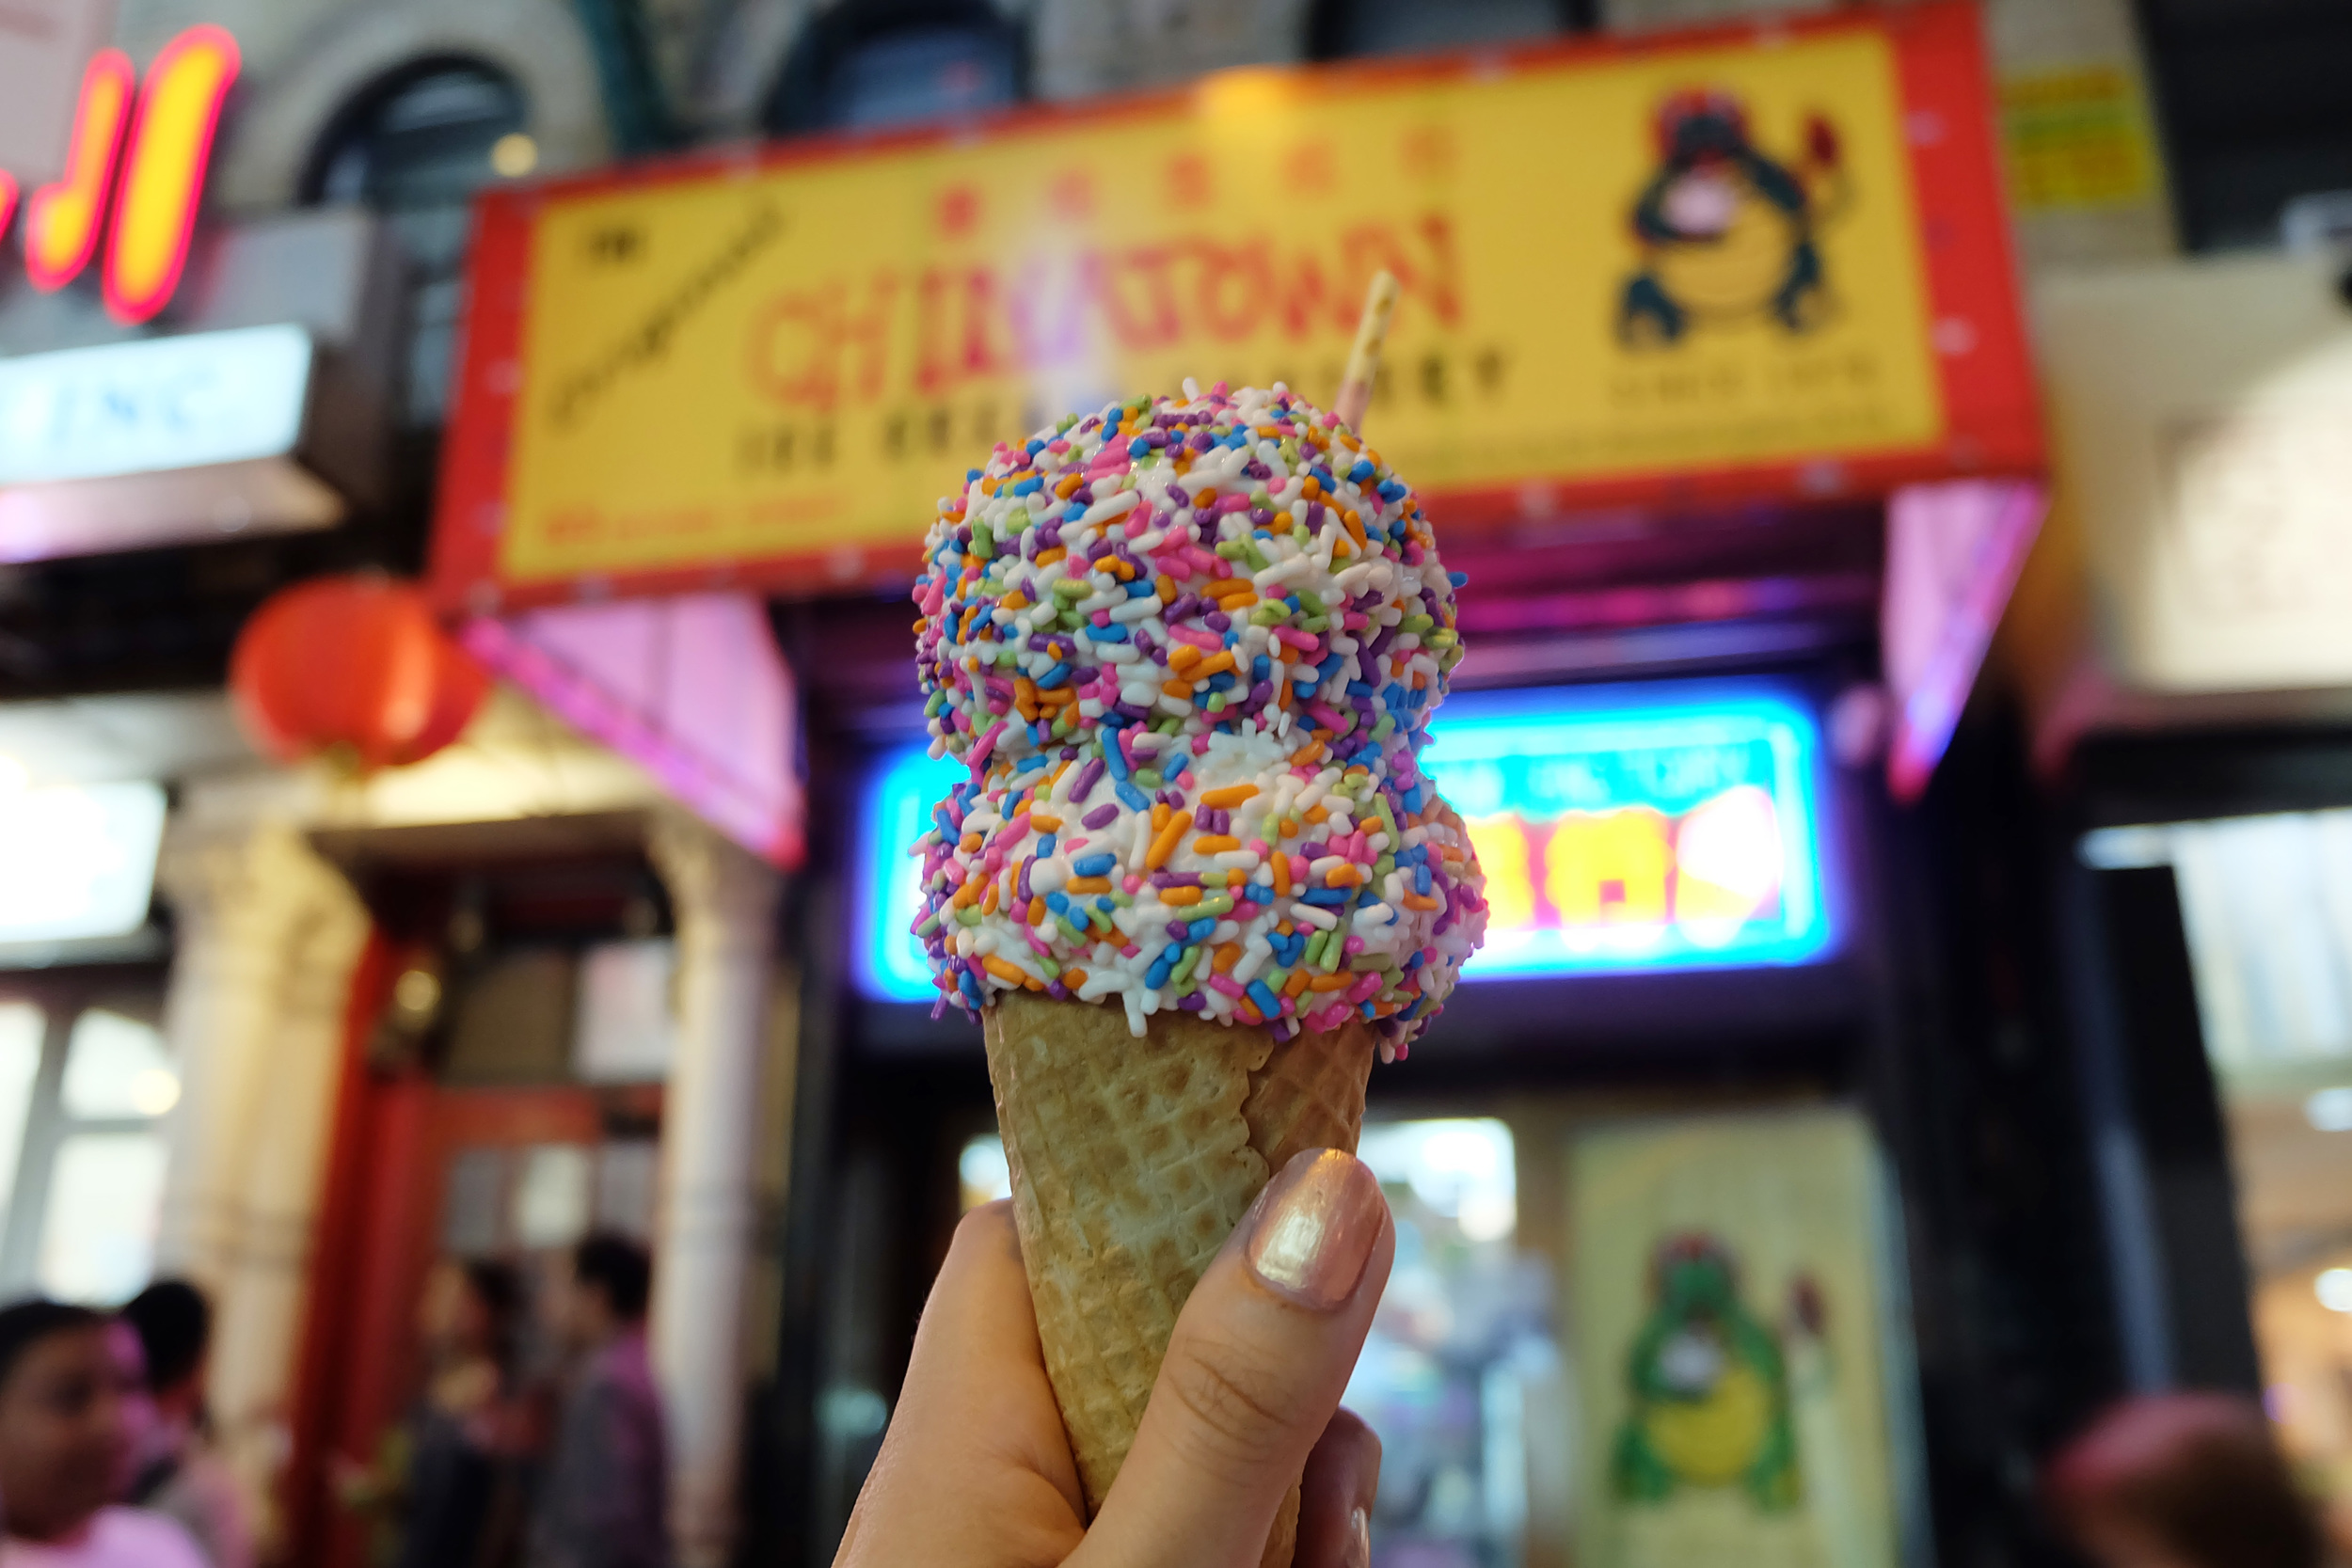 15. Chinatown Ice Cream Factory: One word: Lychee. Add rainbow sprinkles for fun and take a photo in front of the crazy busy neon signs written in English and Chinese. 